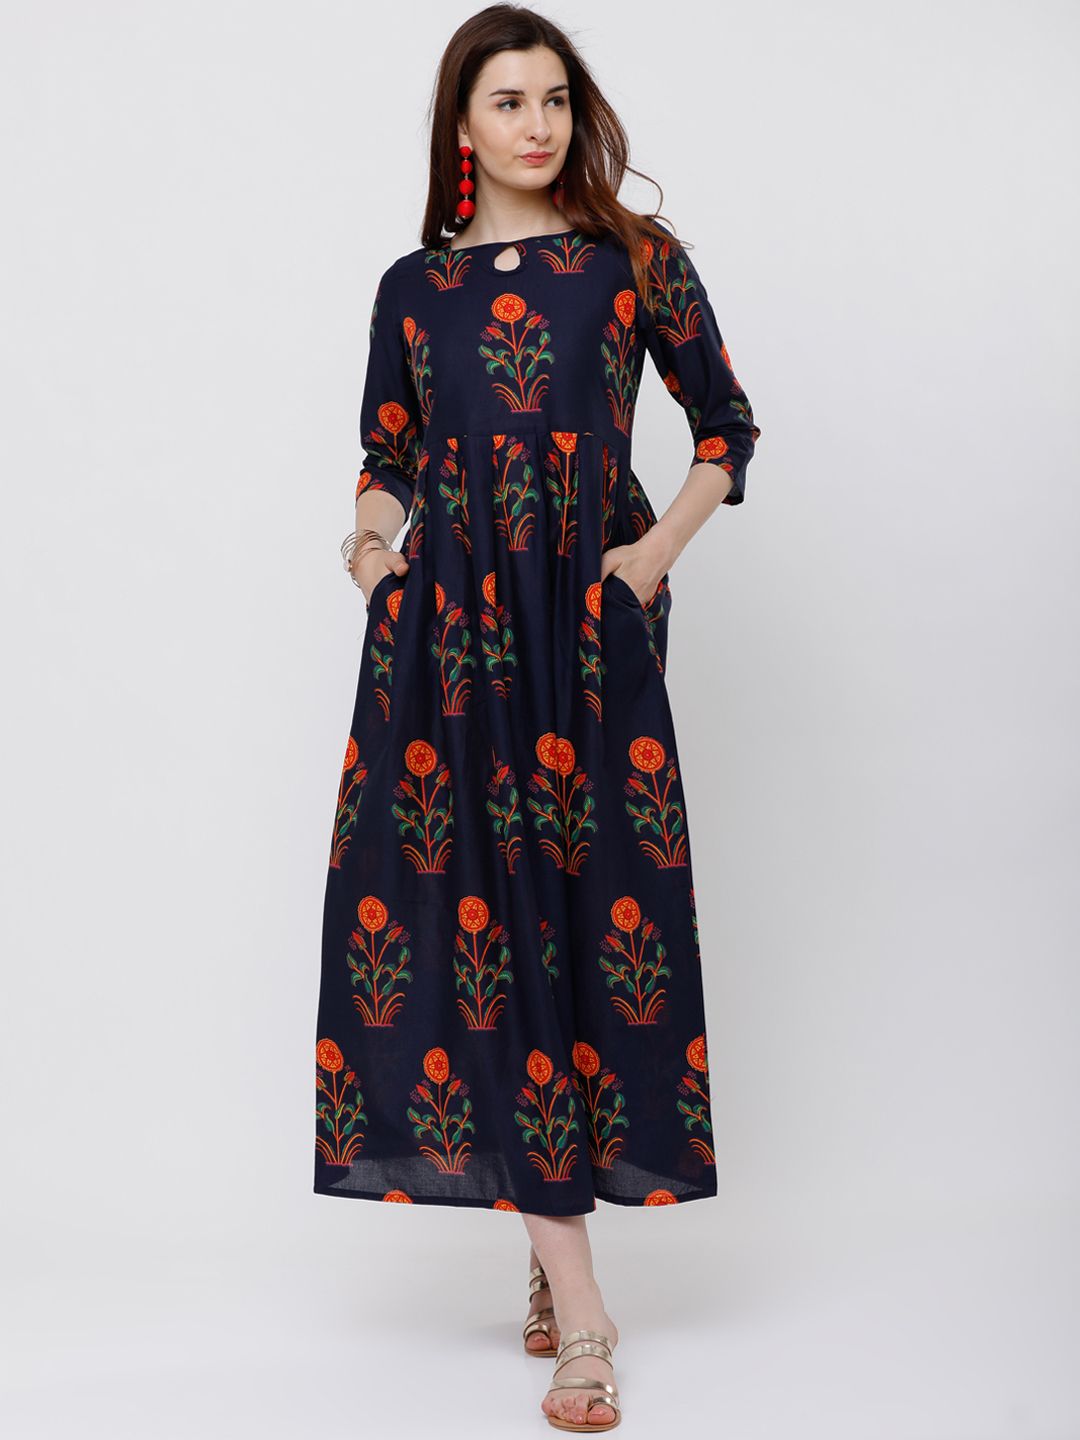 Vishudh Women Navy Blue Floral Printed Ethnic Maxi Dress Price in India